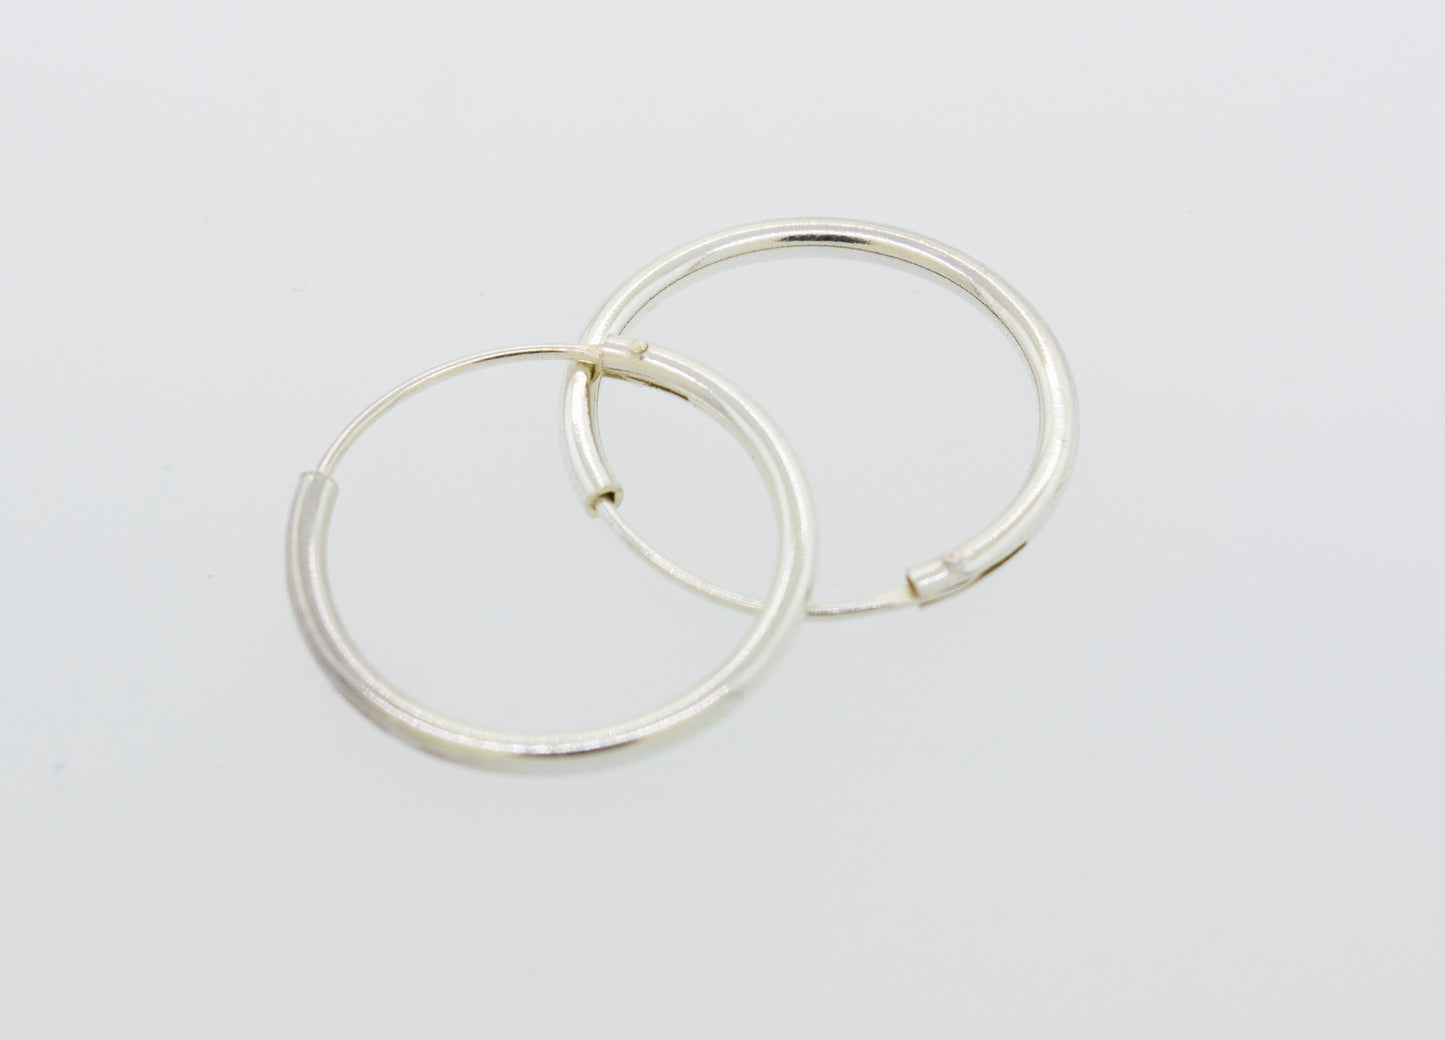 Everyday use Super Silver Silver Infinity Hoops 1mm X 17.5mm on a white surface.